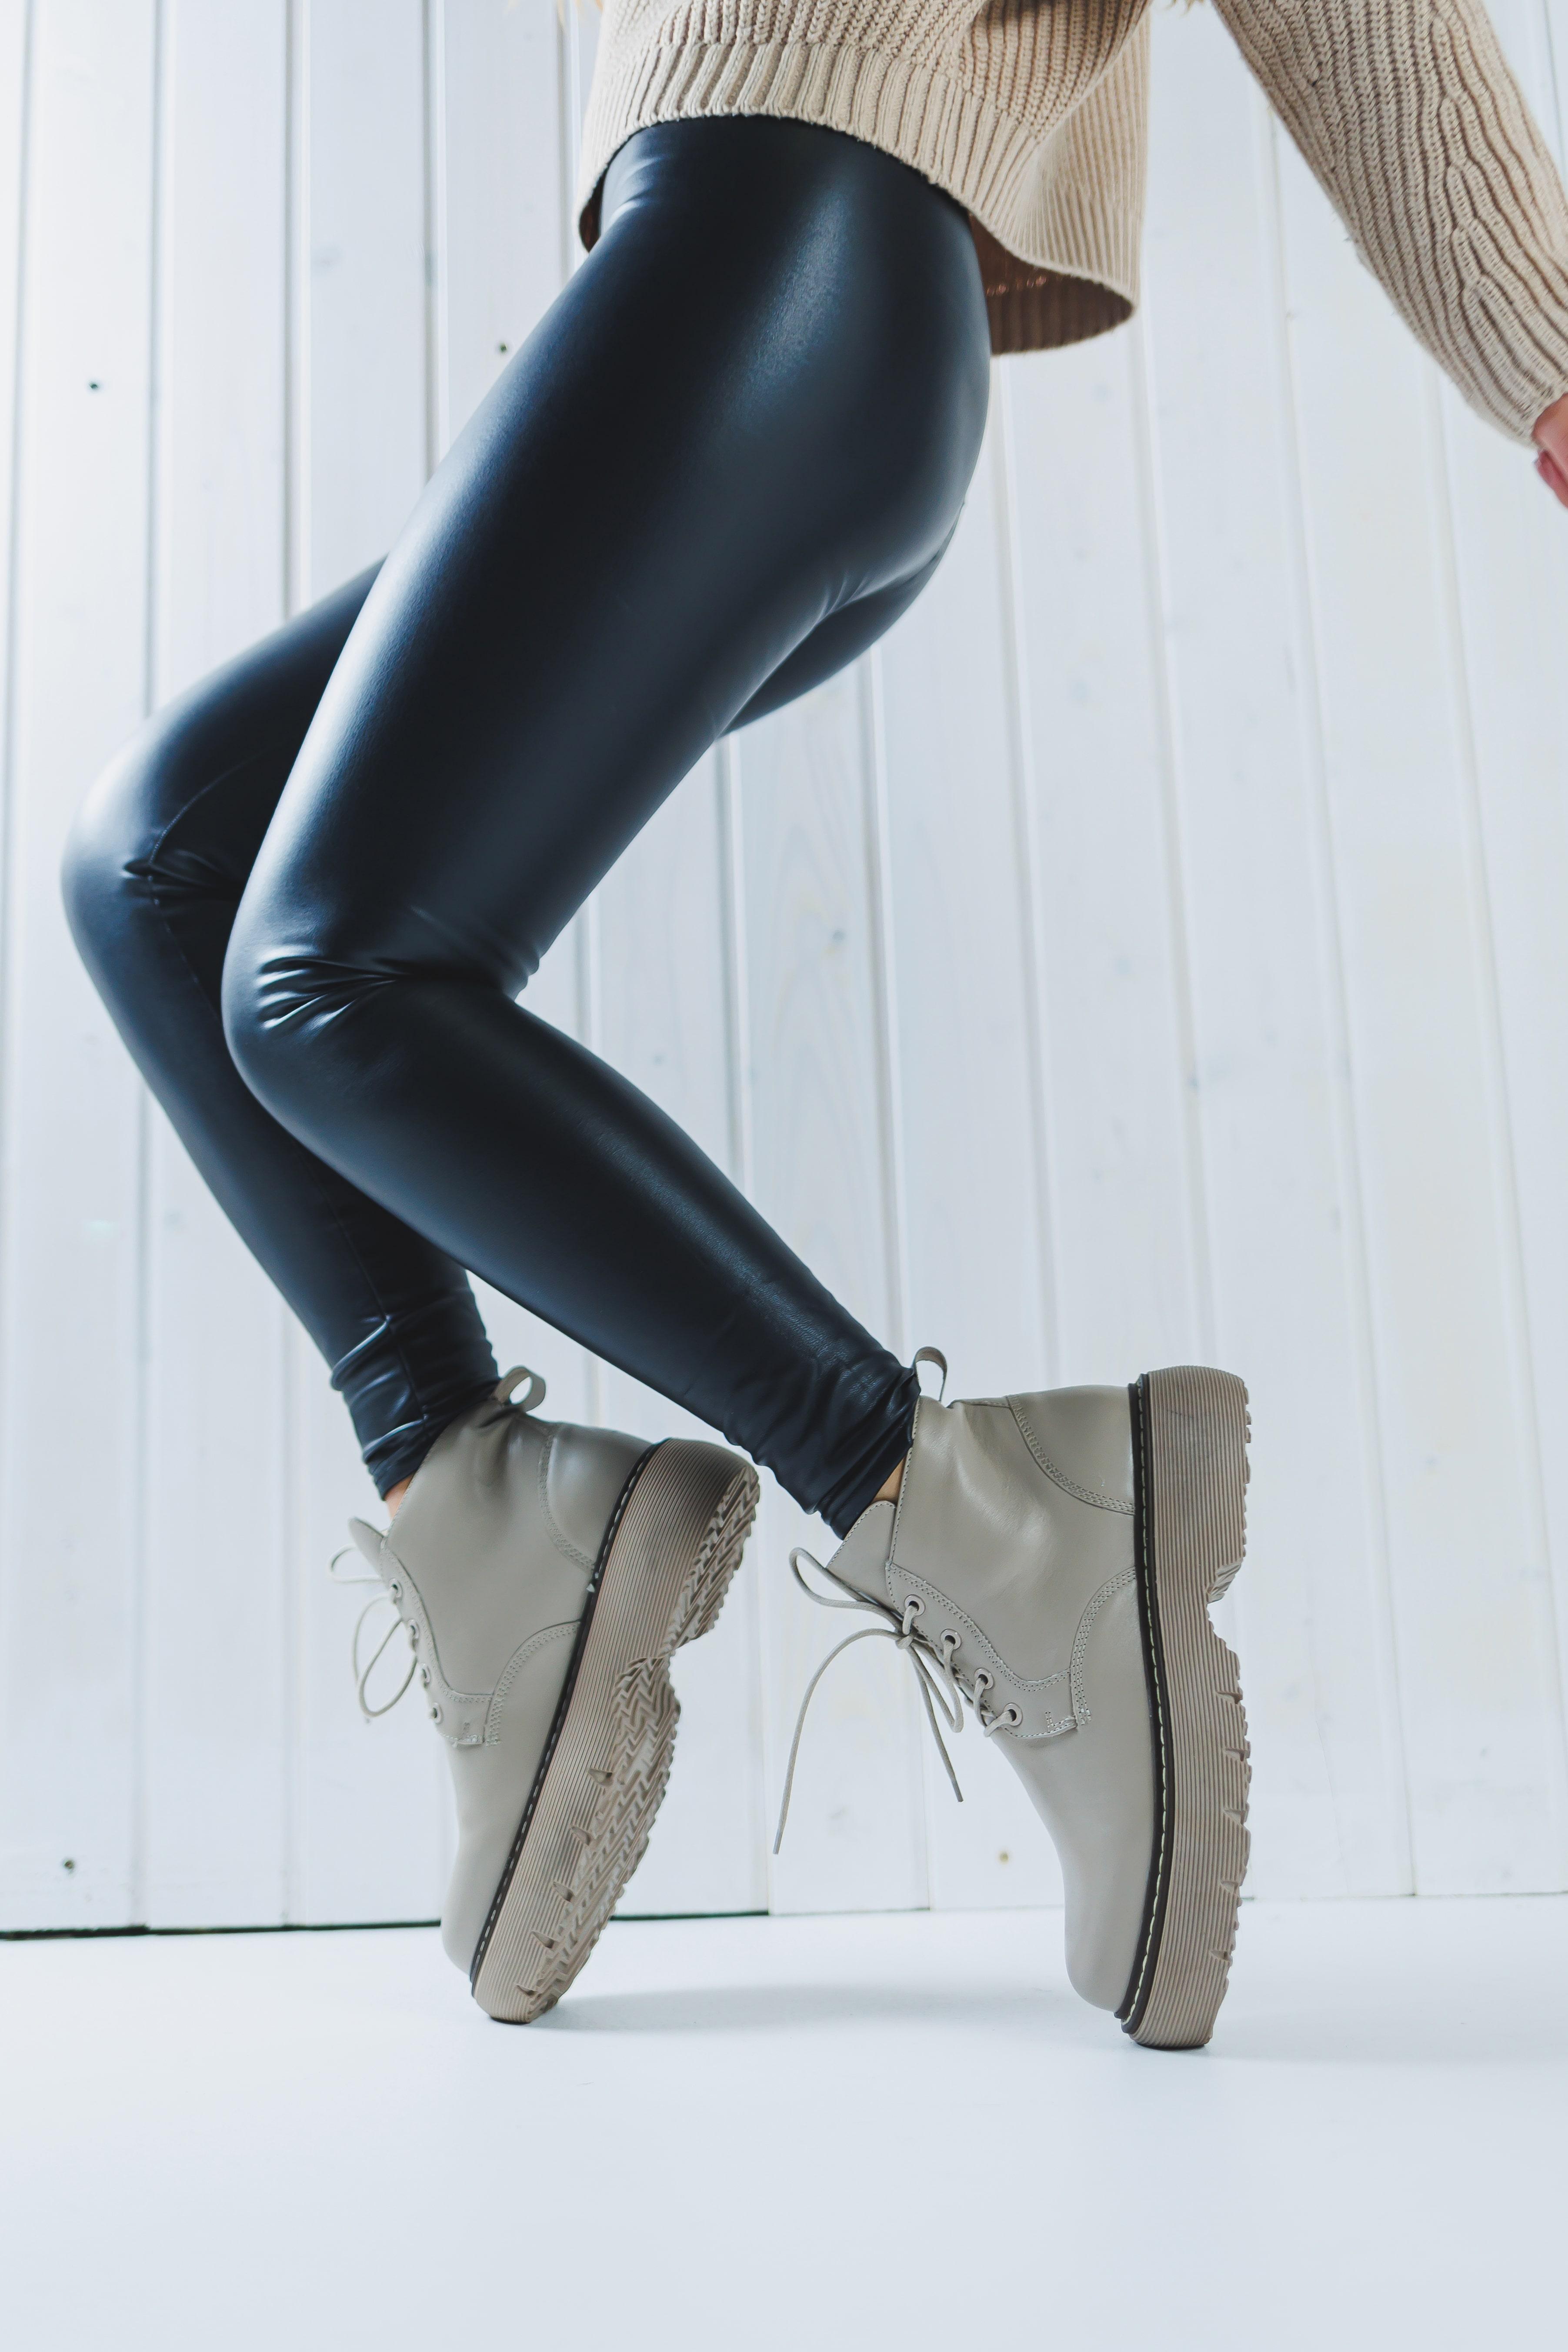 Wear Black Leggings with Ankle Boots